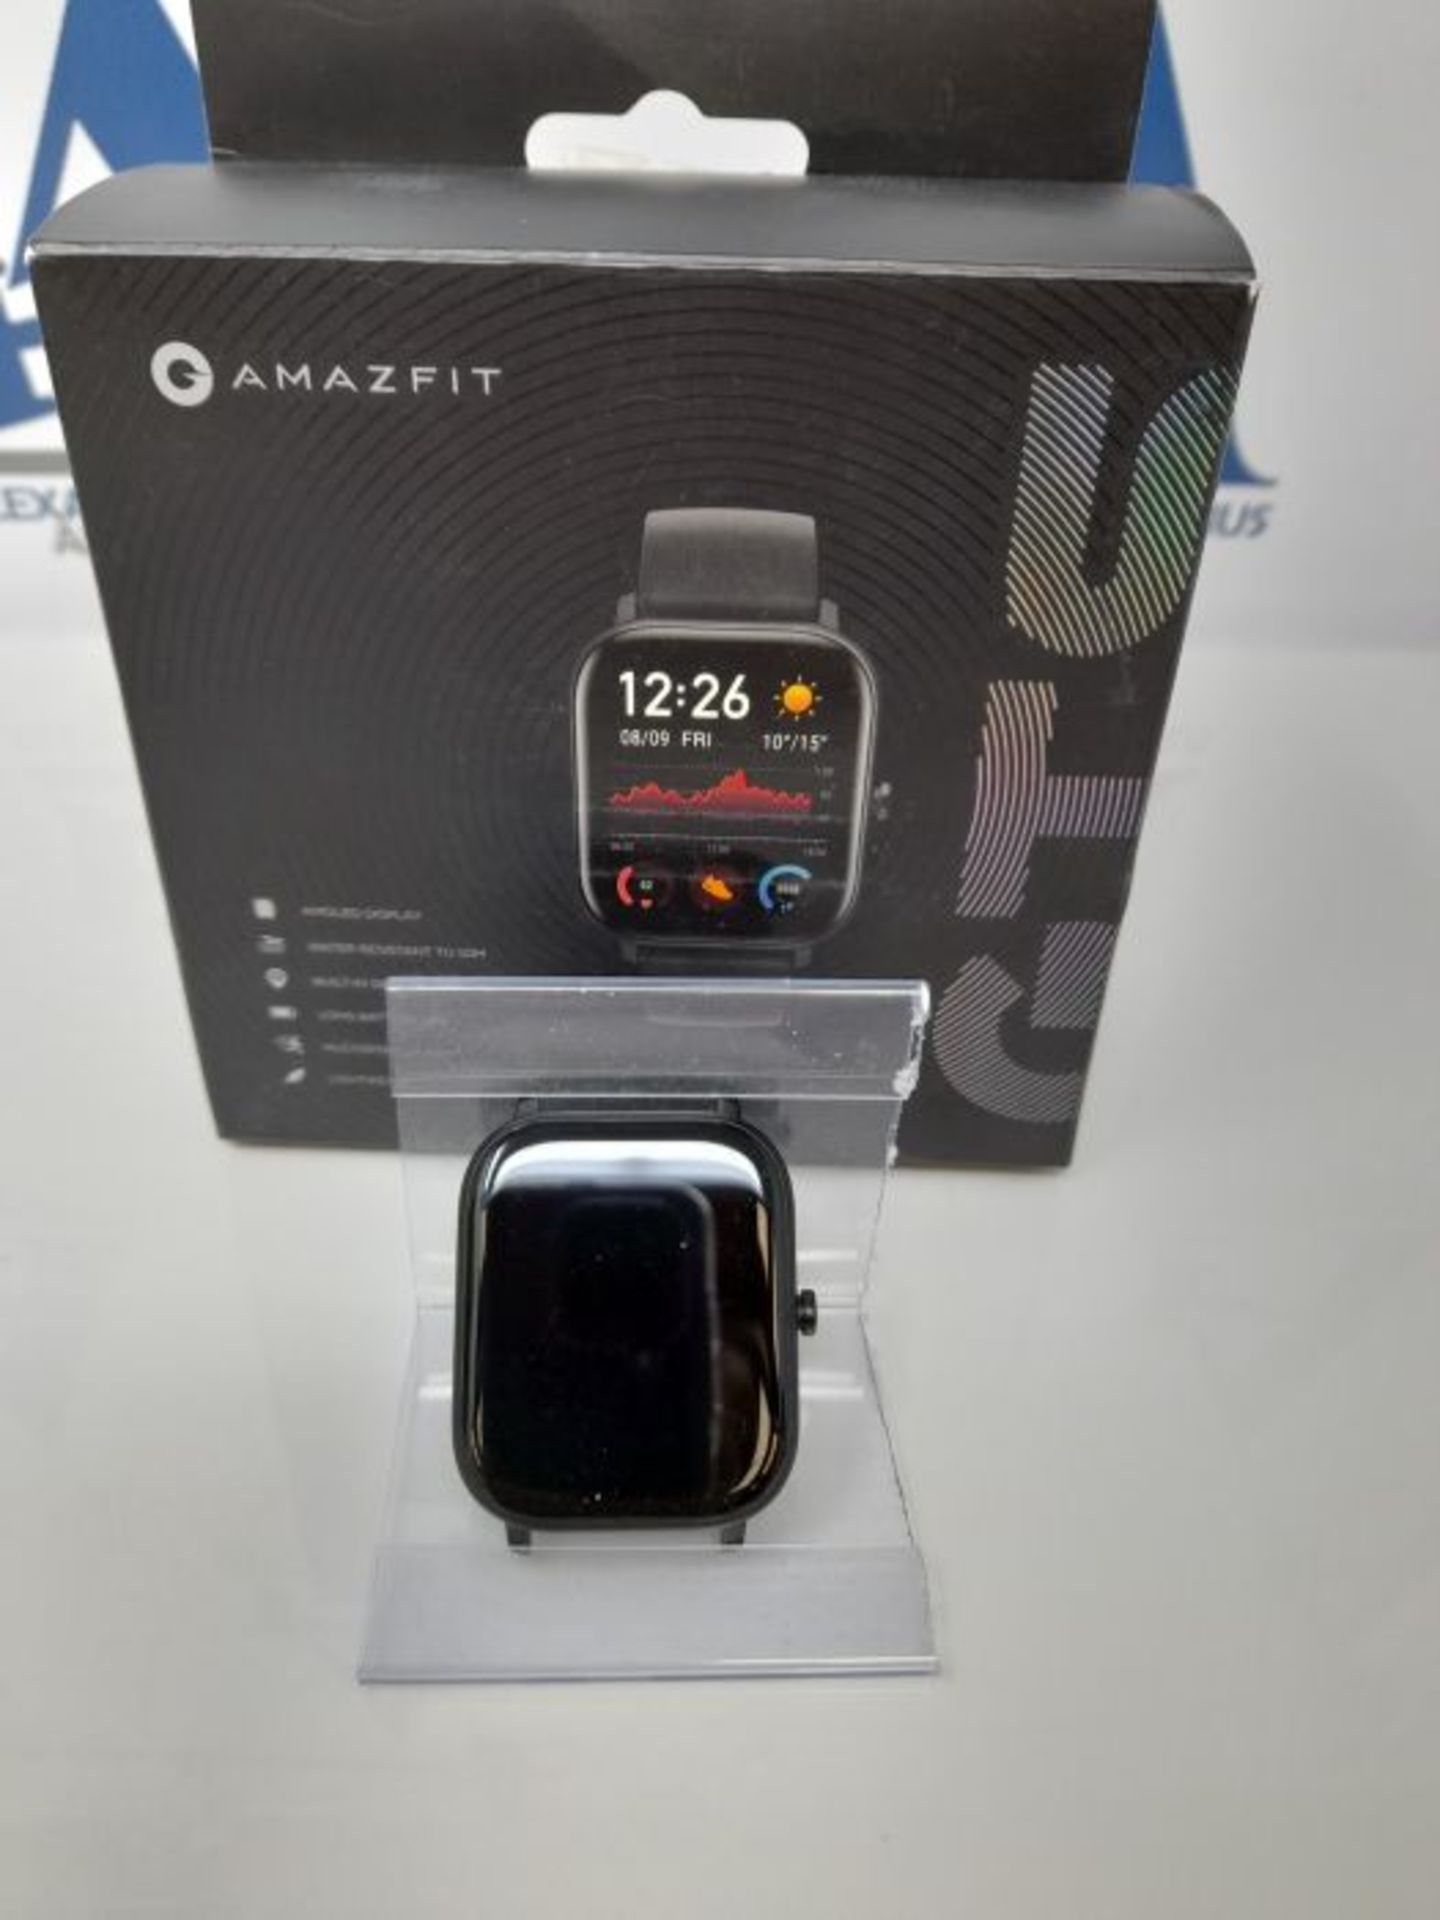 RRP £114.00 [INCOMPLETE] Amazfit Men's Smartwatch GTS with 12 Modes, GPS, 1.65 ?AMOLED Display Fit - Image 2 of 3